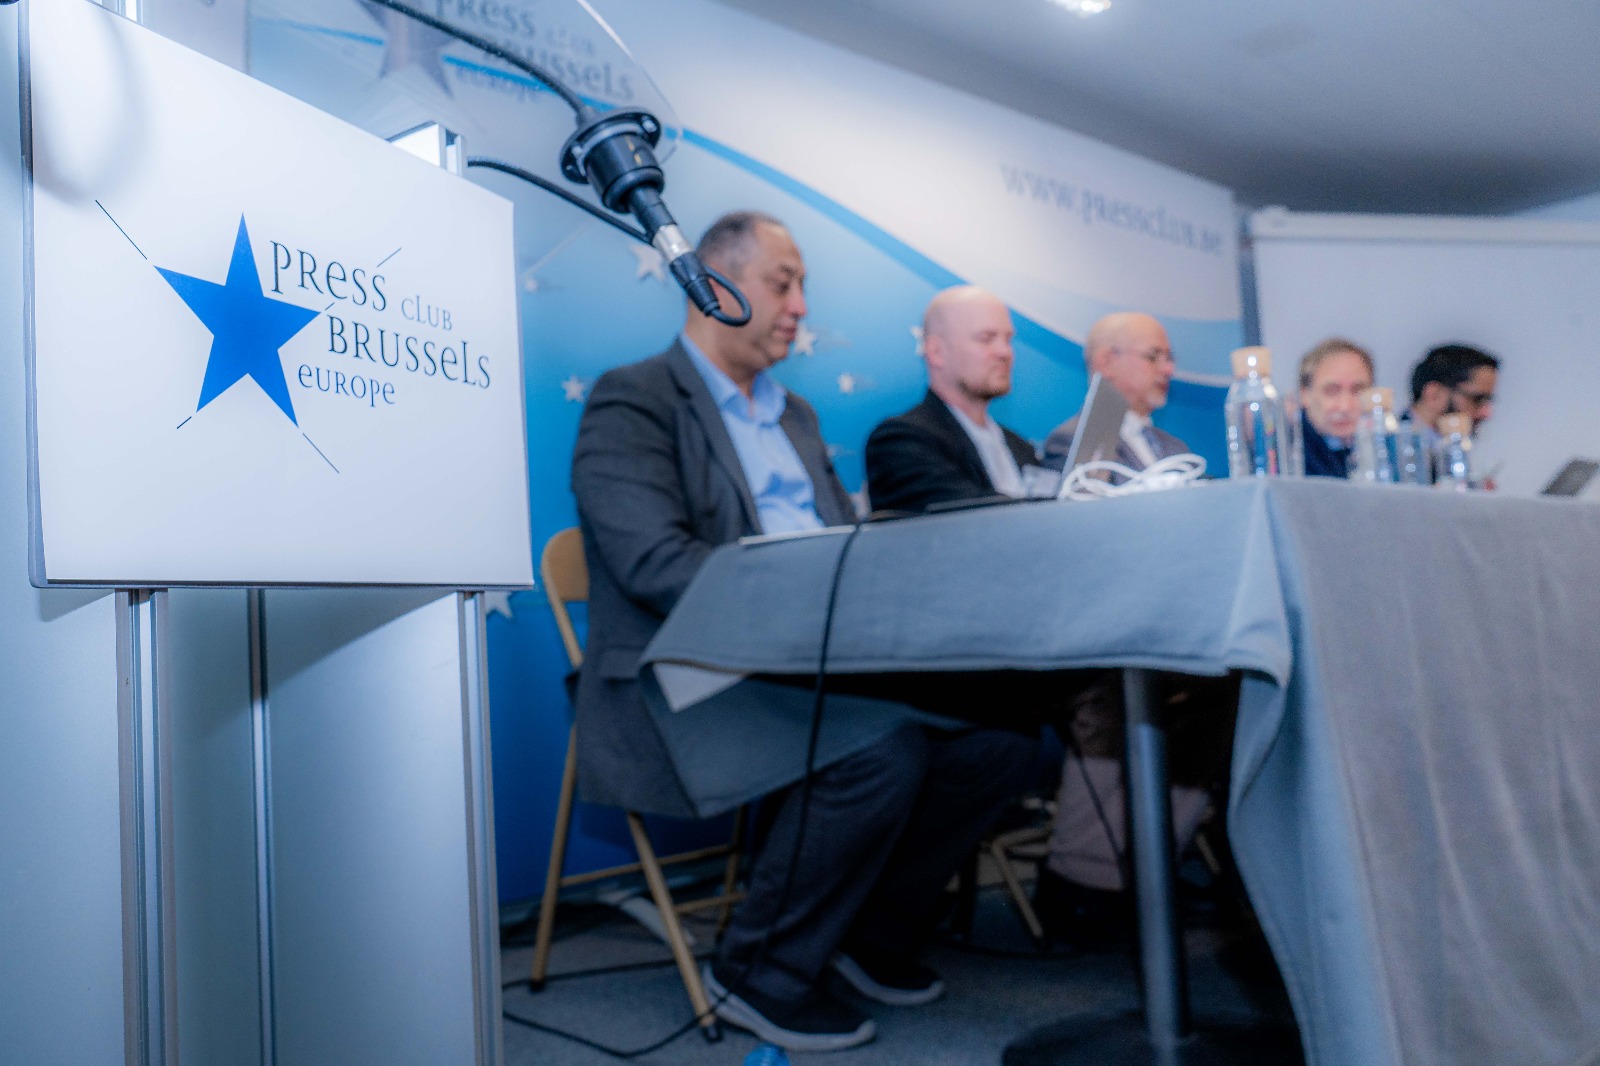 Press Conference Addresses "Abu Dhabi Secrets" in Brussels, Prompting Global Attention - PHOTOS